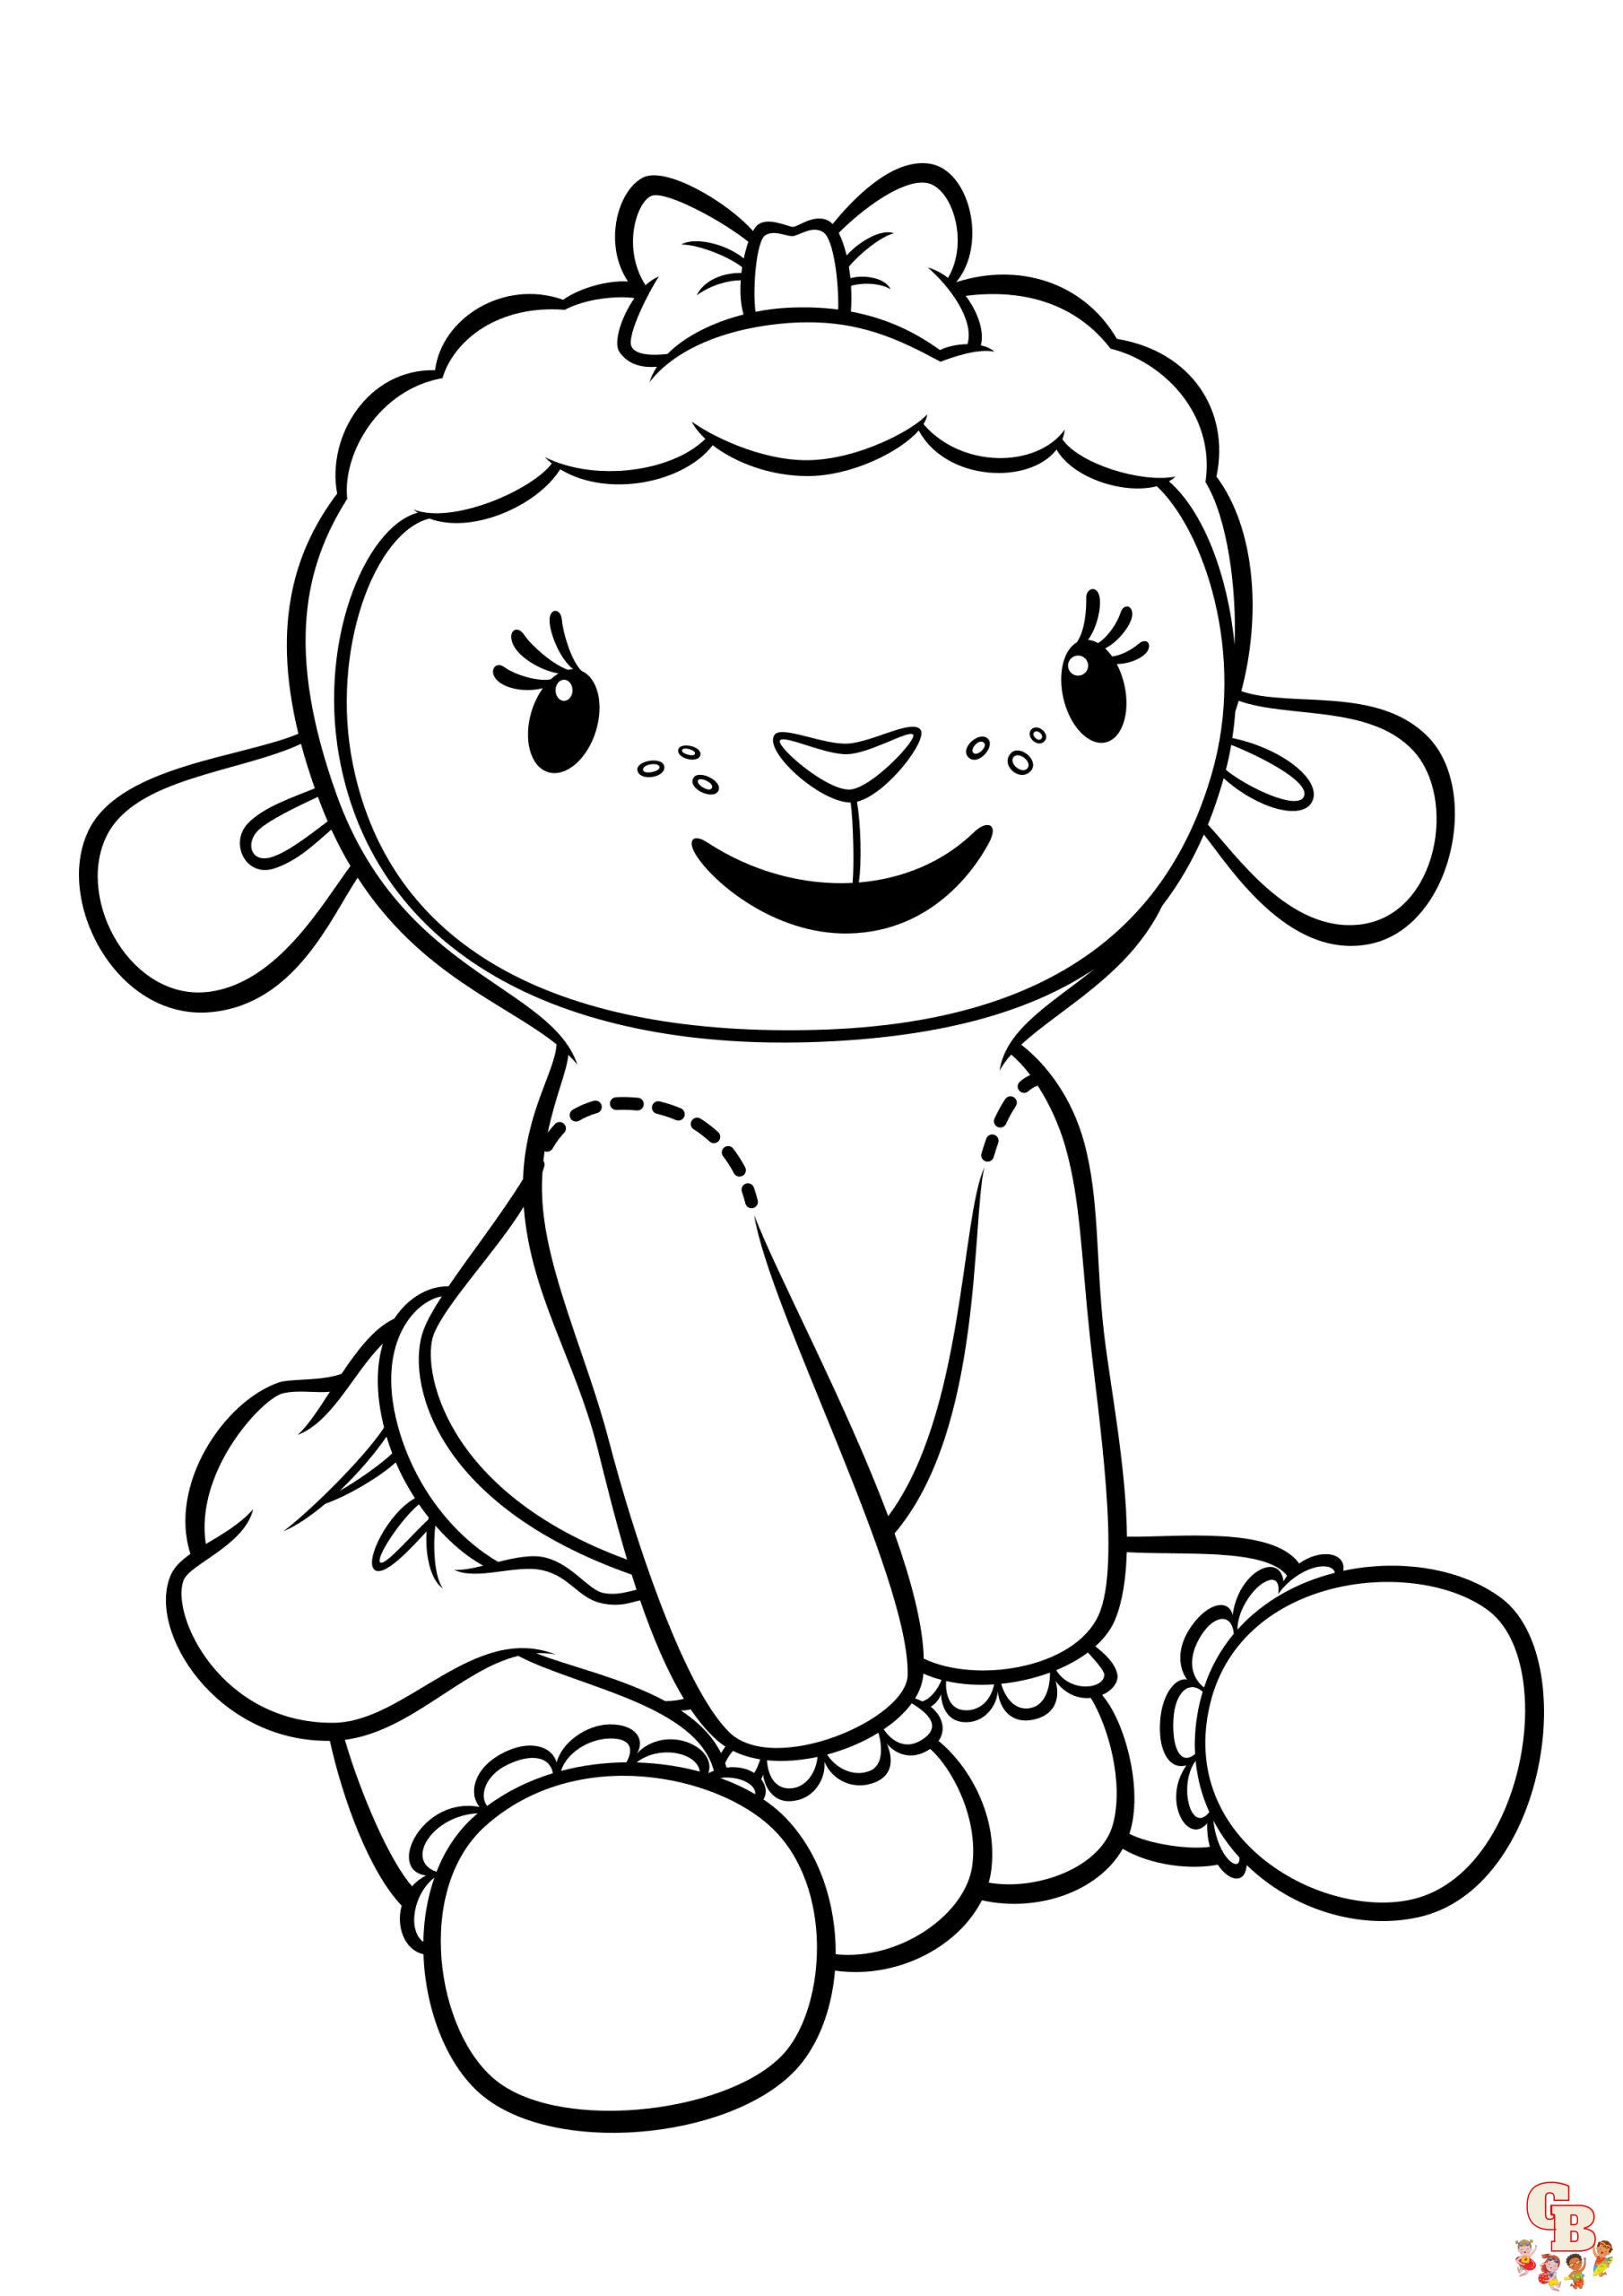 Cute Lambie coloring pages